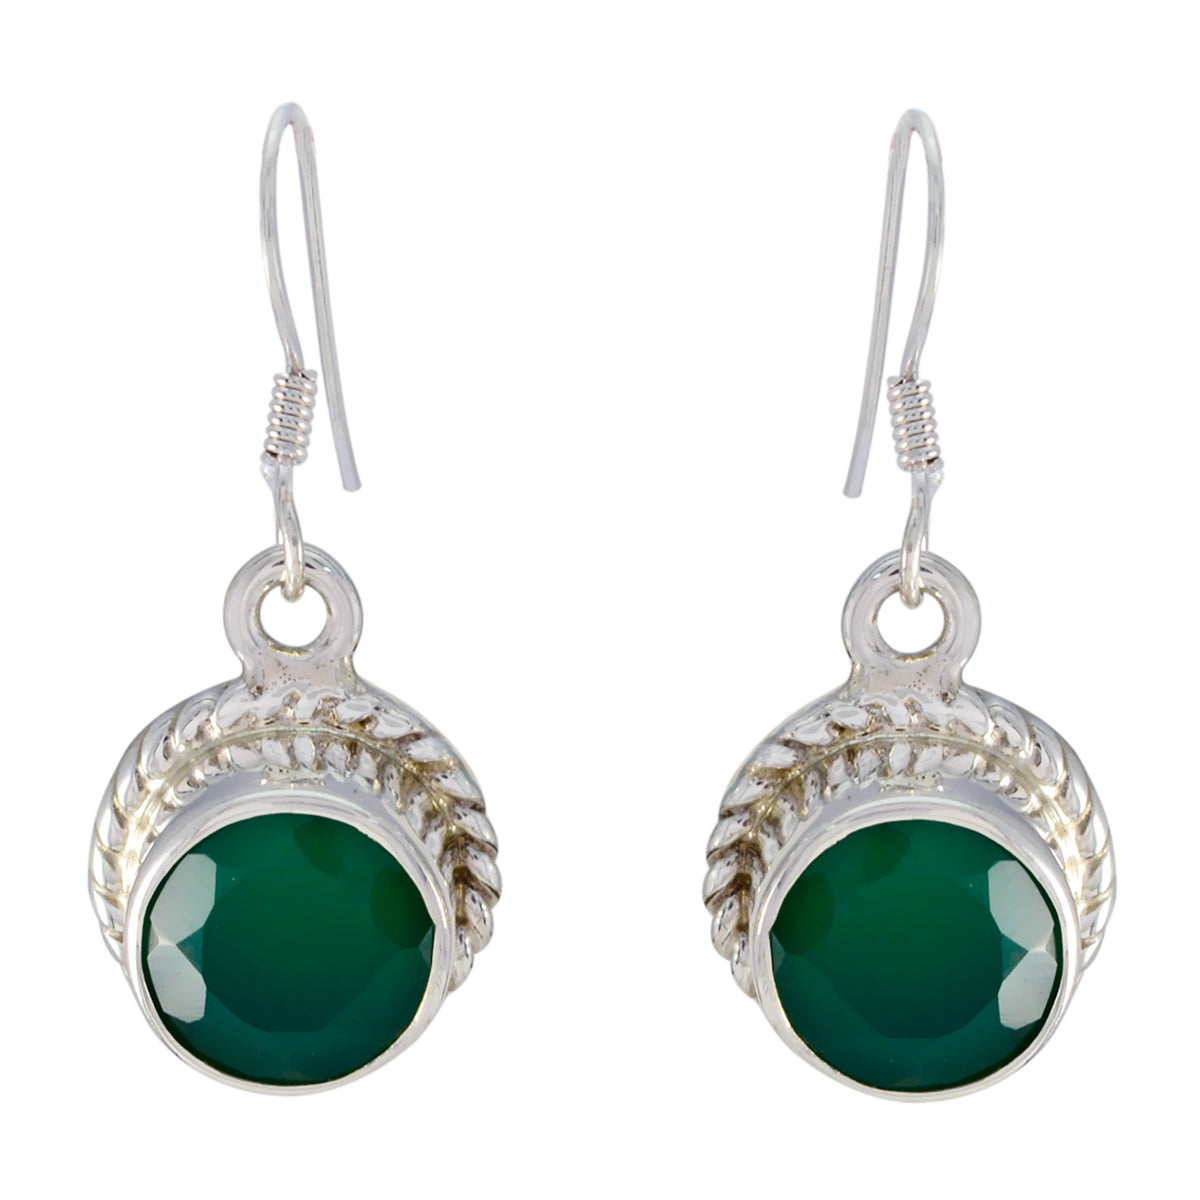 Riyo Genuine Gems round Faceted Green Onyx Silver Earrings gift for easter Sunday